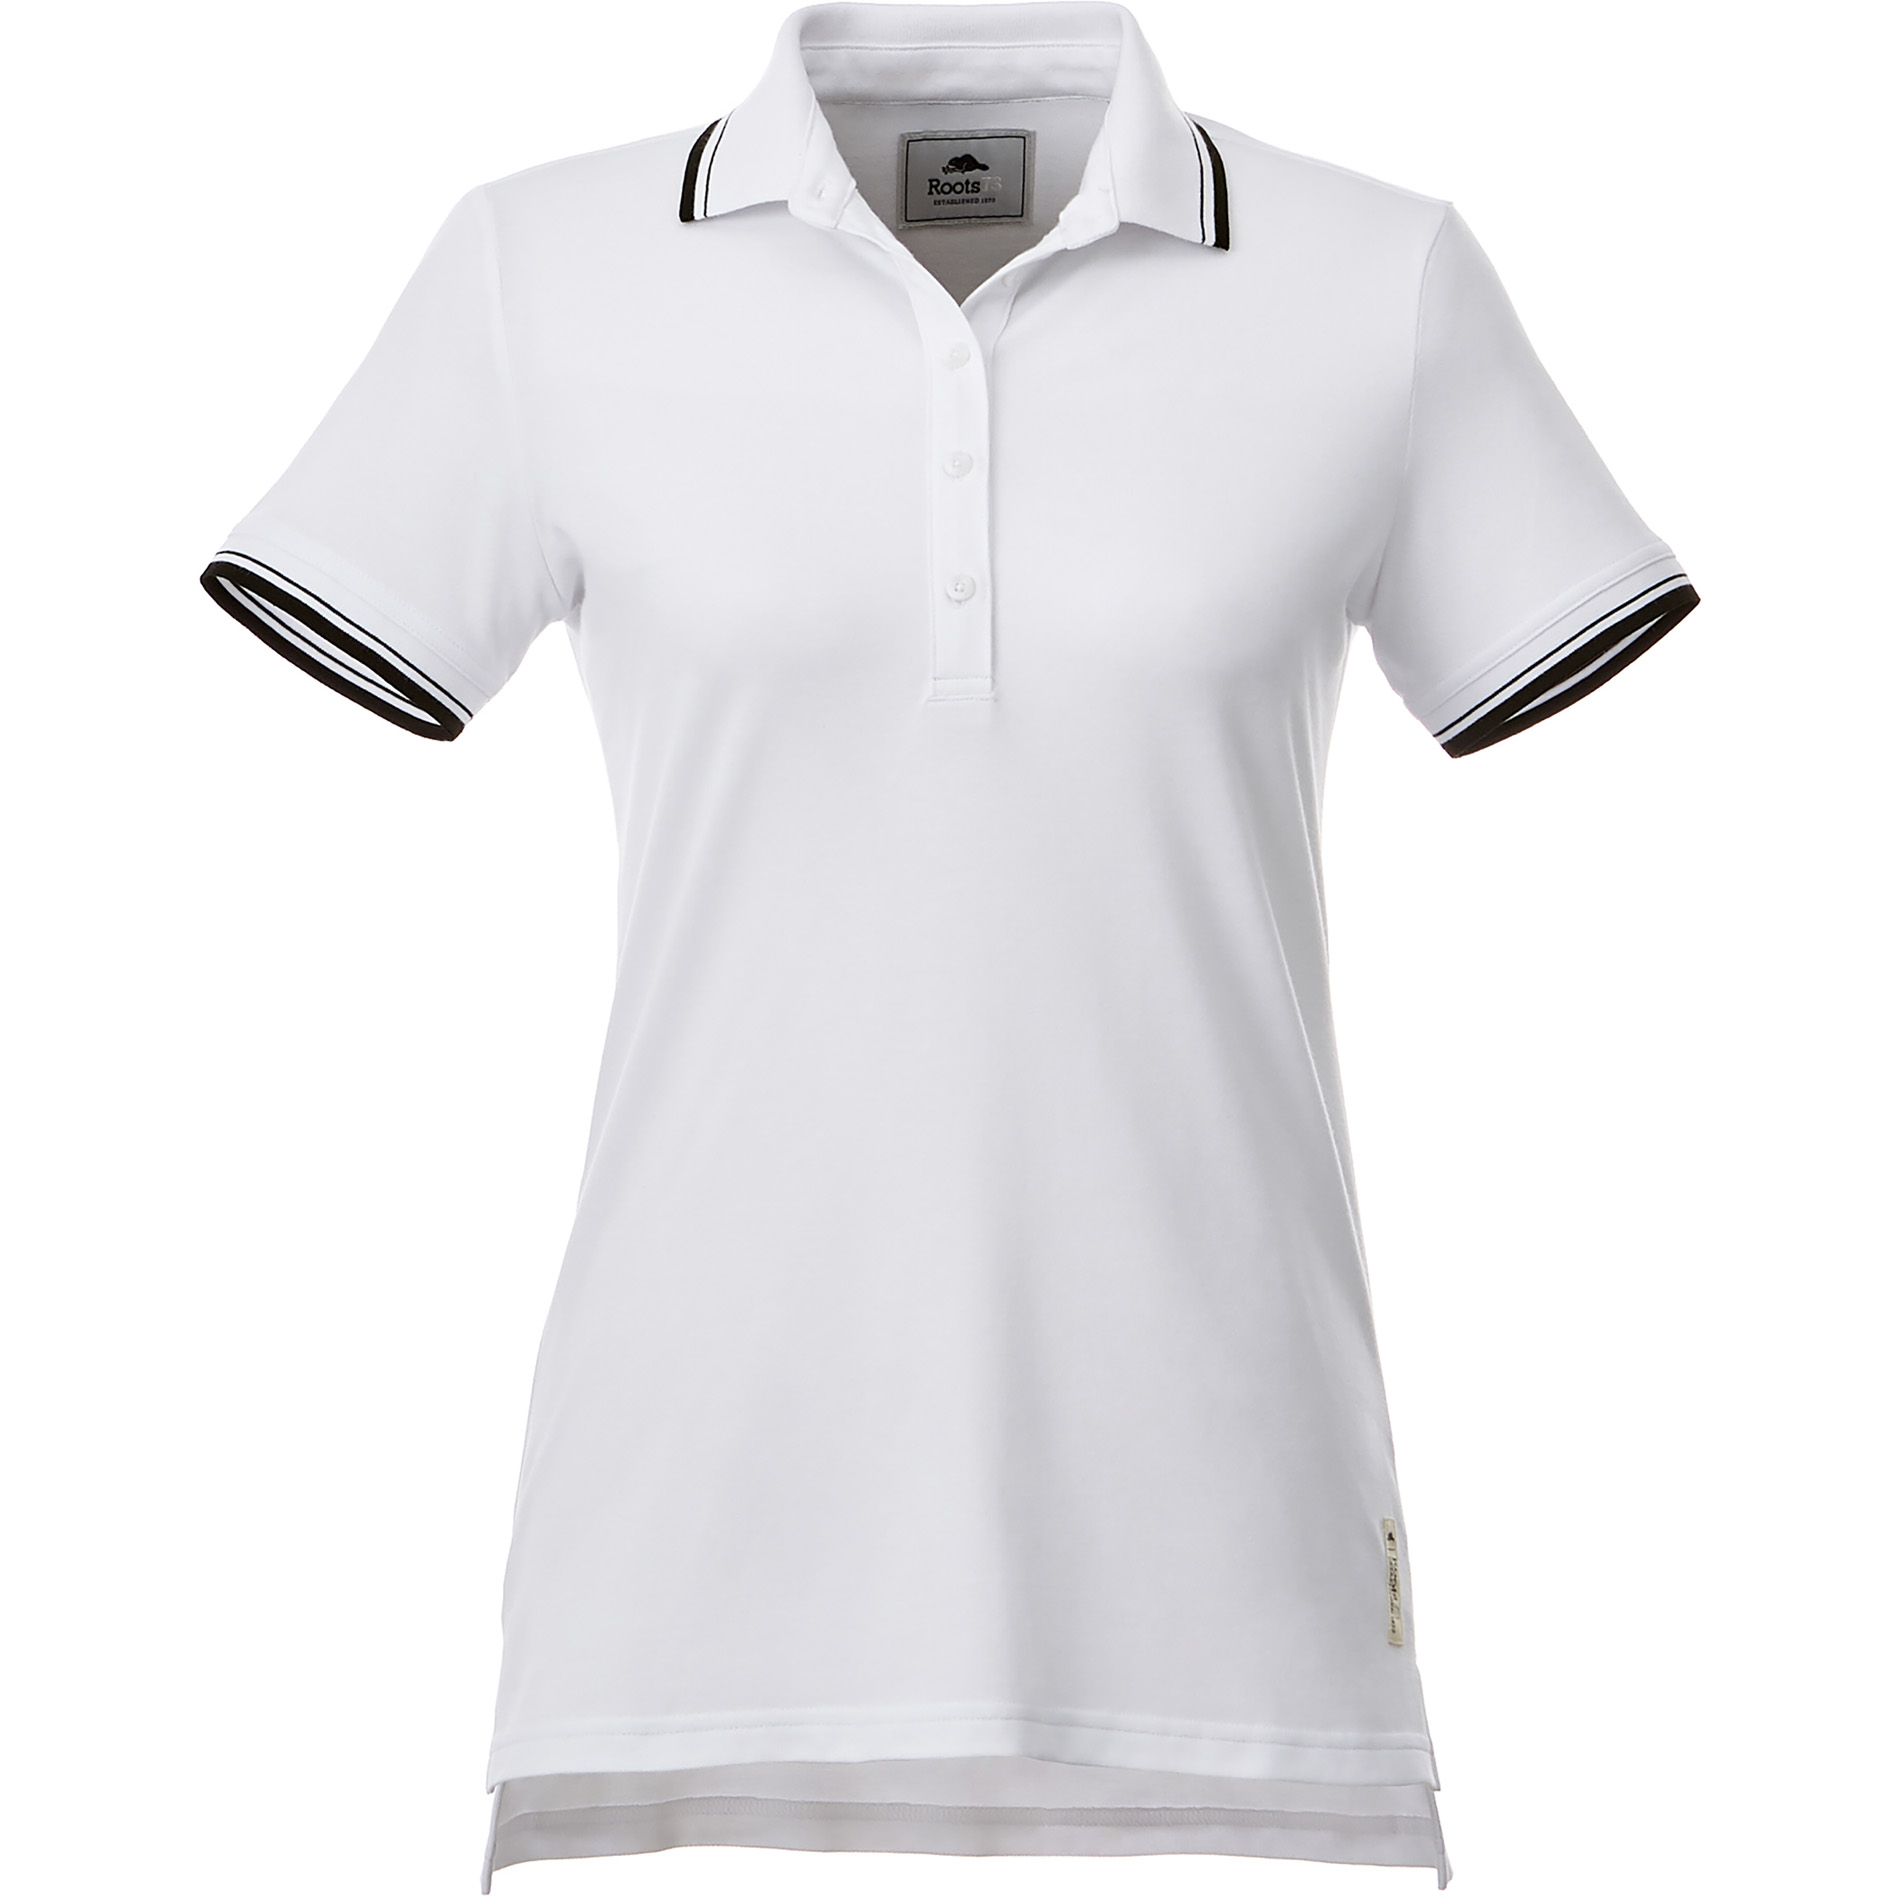 Roots73 TM96613 - W-LIMESTONE Roots73 SS Polo